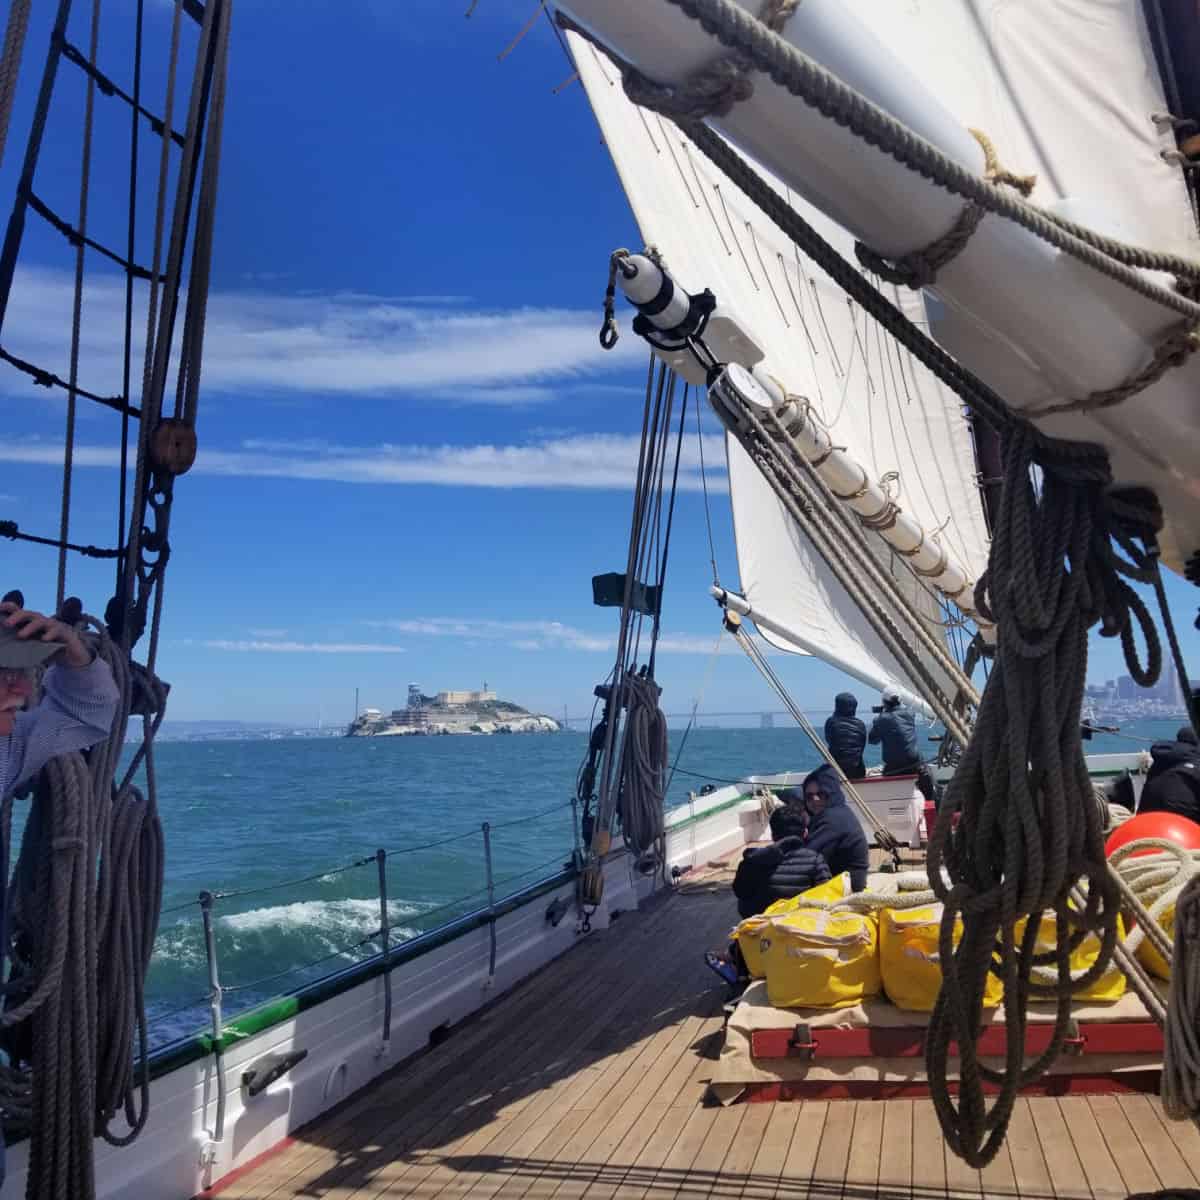 Seeing Alcatraz Island from the 1891 Scow Schooner Alma while sailing in the San Francisco Bay